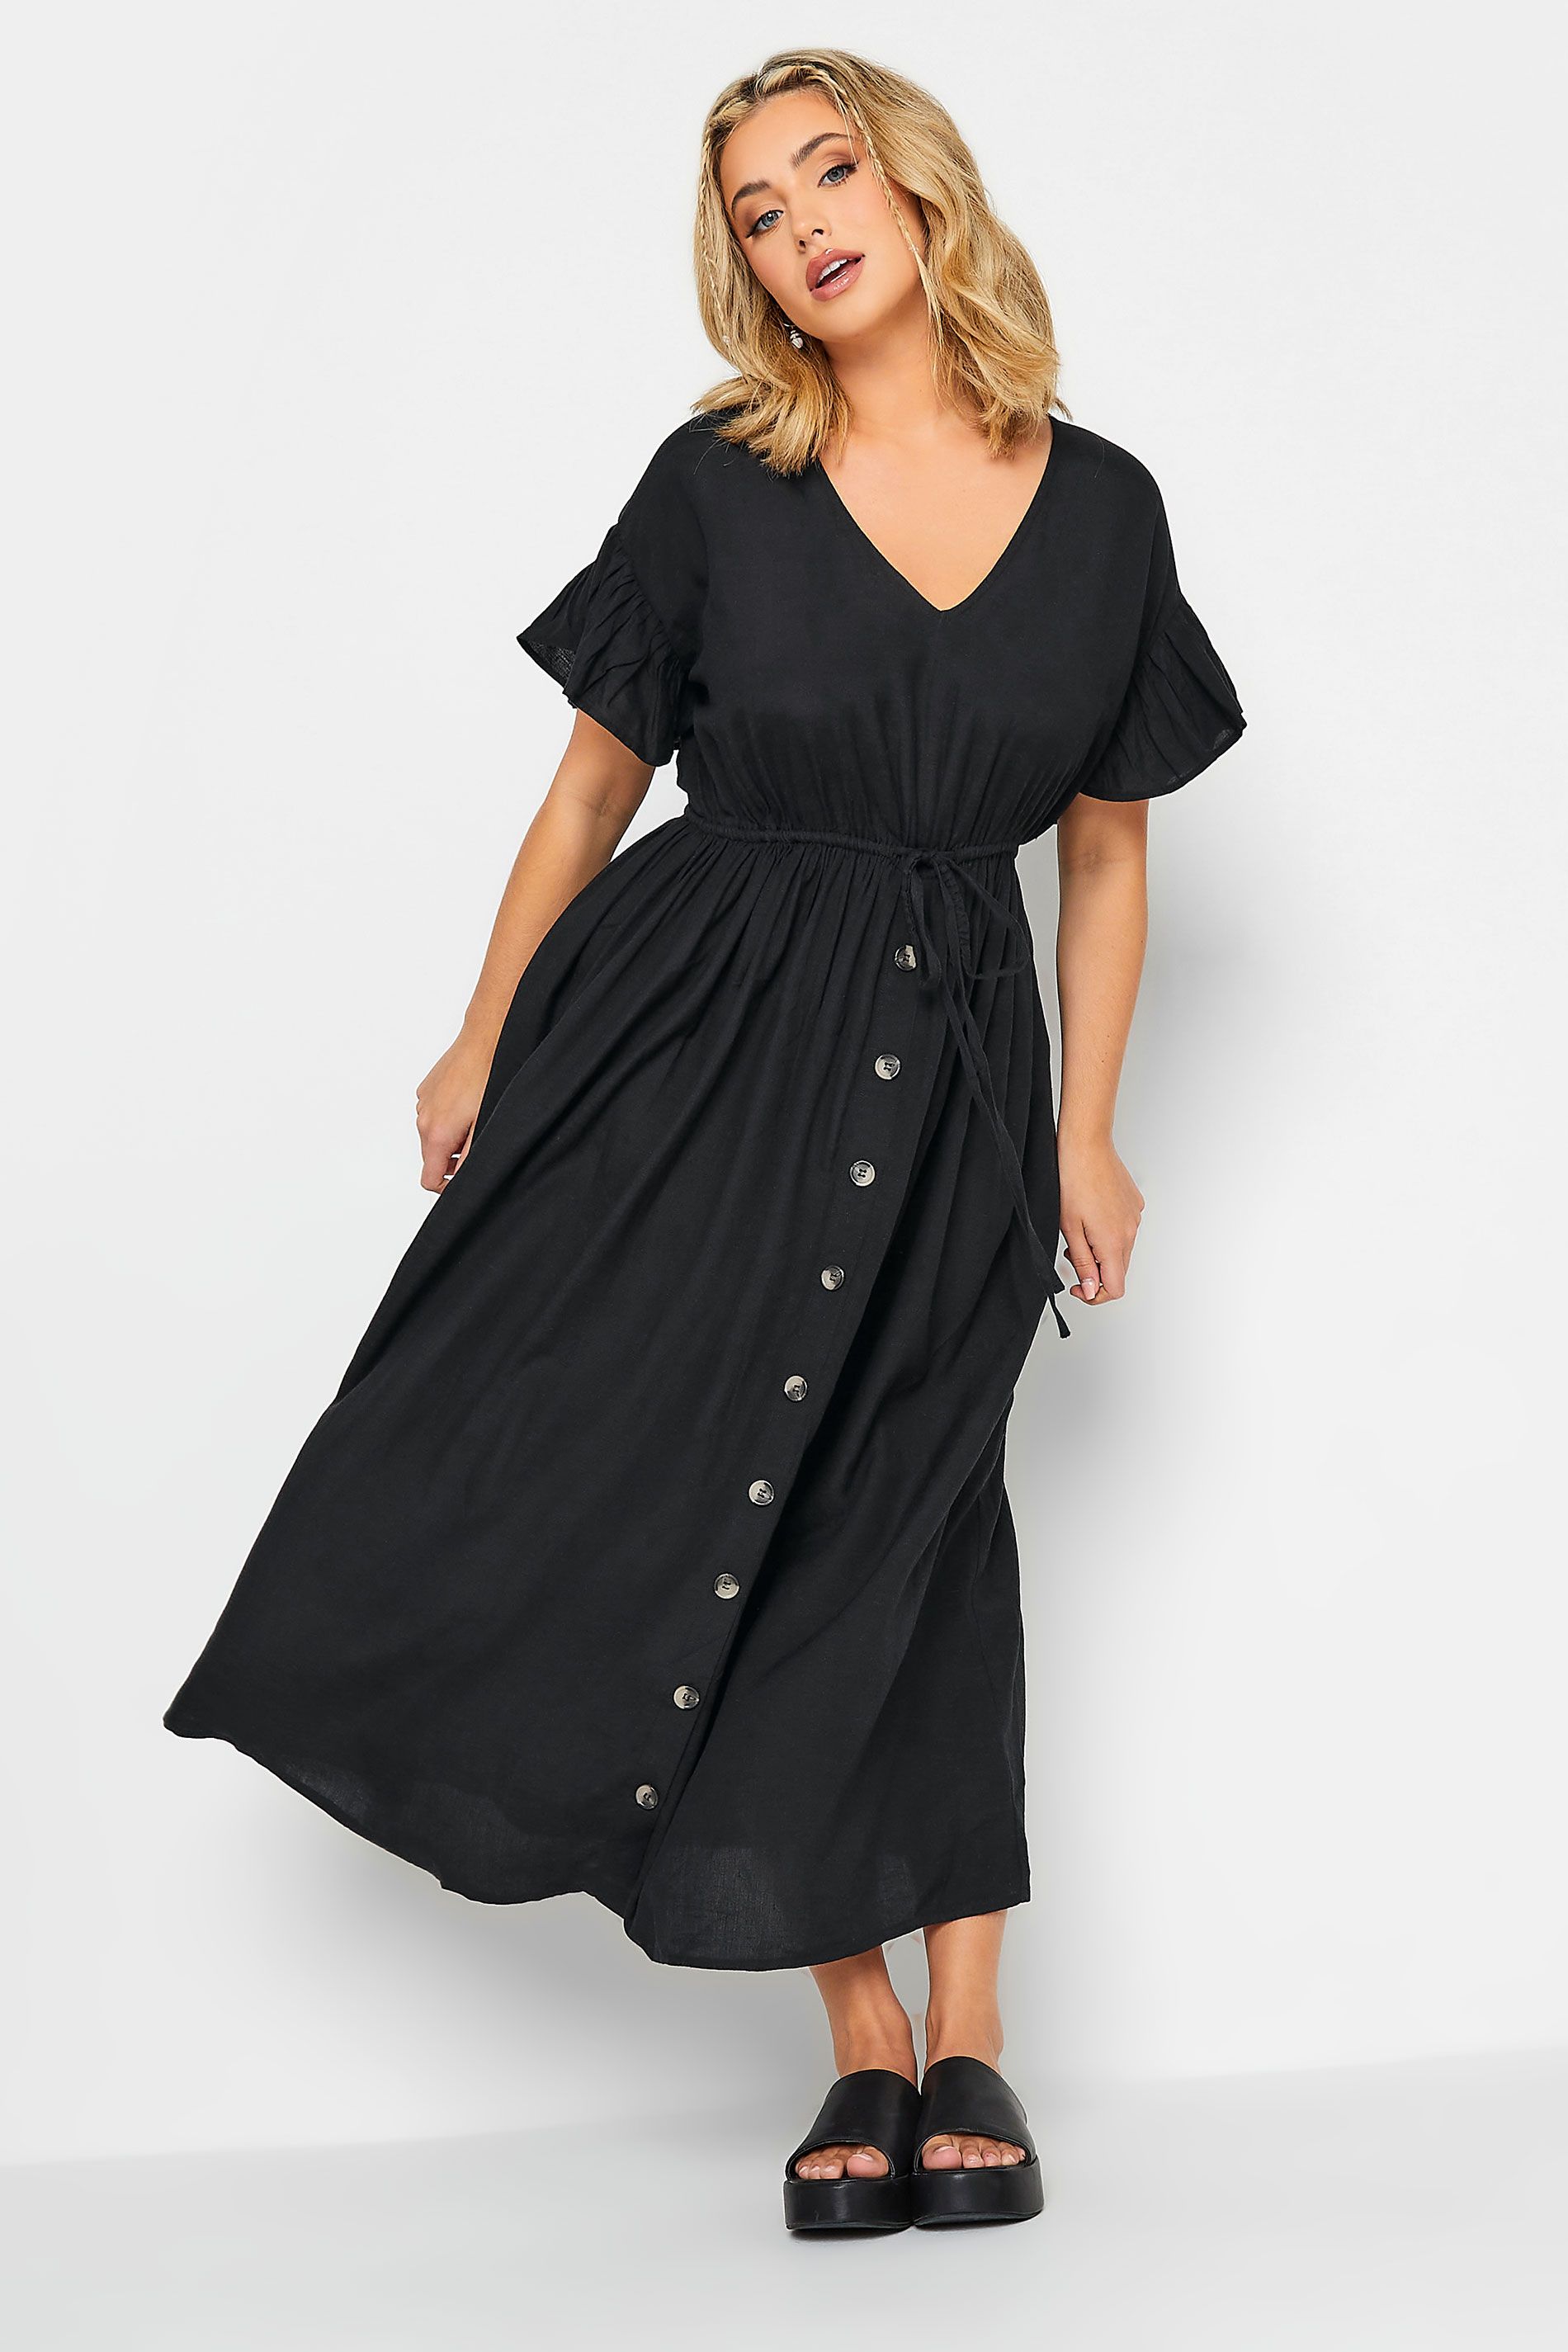 LIMITED COLLECTION Plus Size Black Frill Sleeve Linen Maxi Dress | Yours Clothing 1